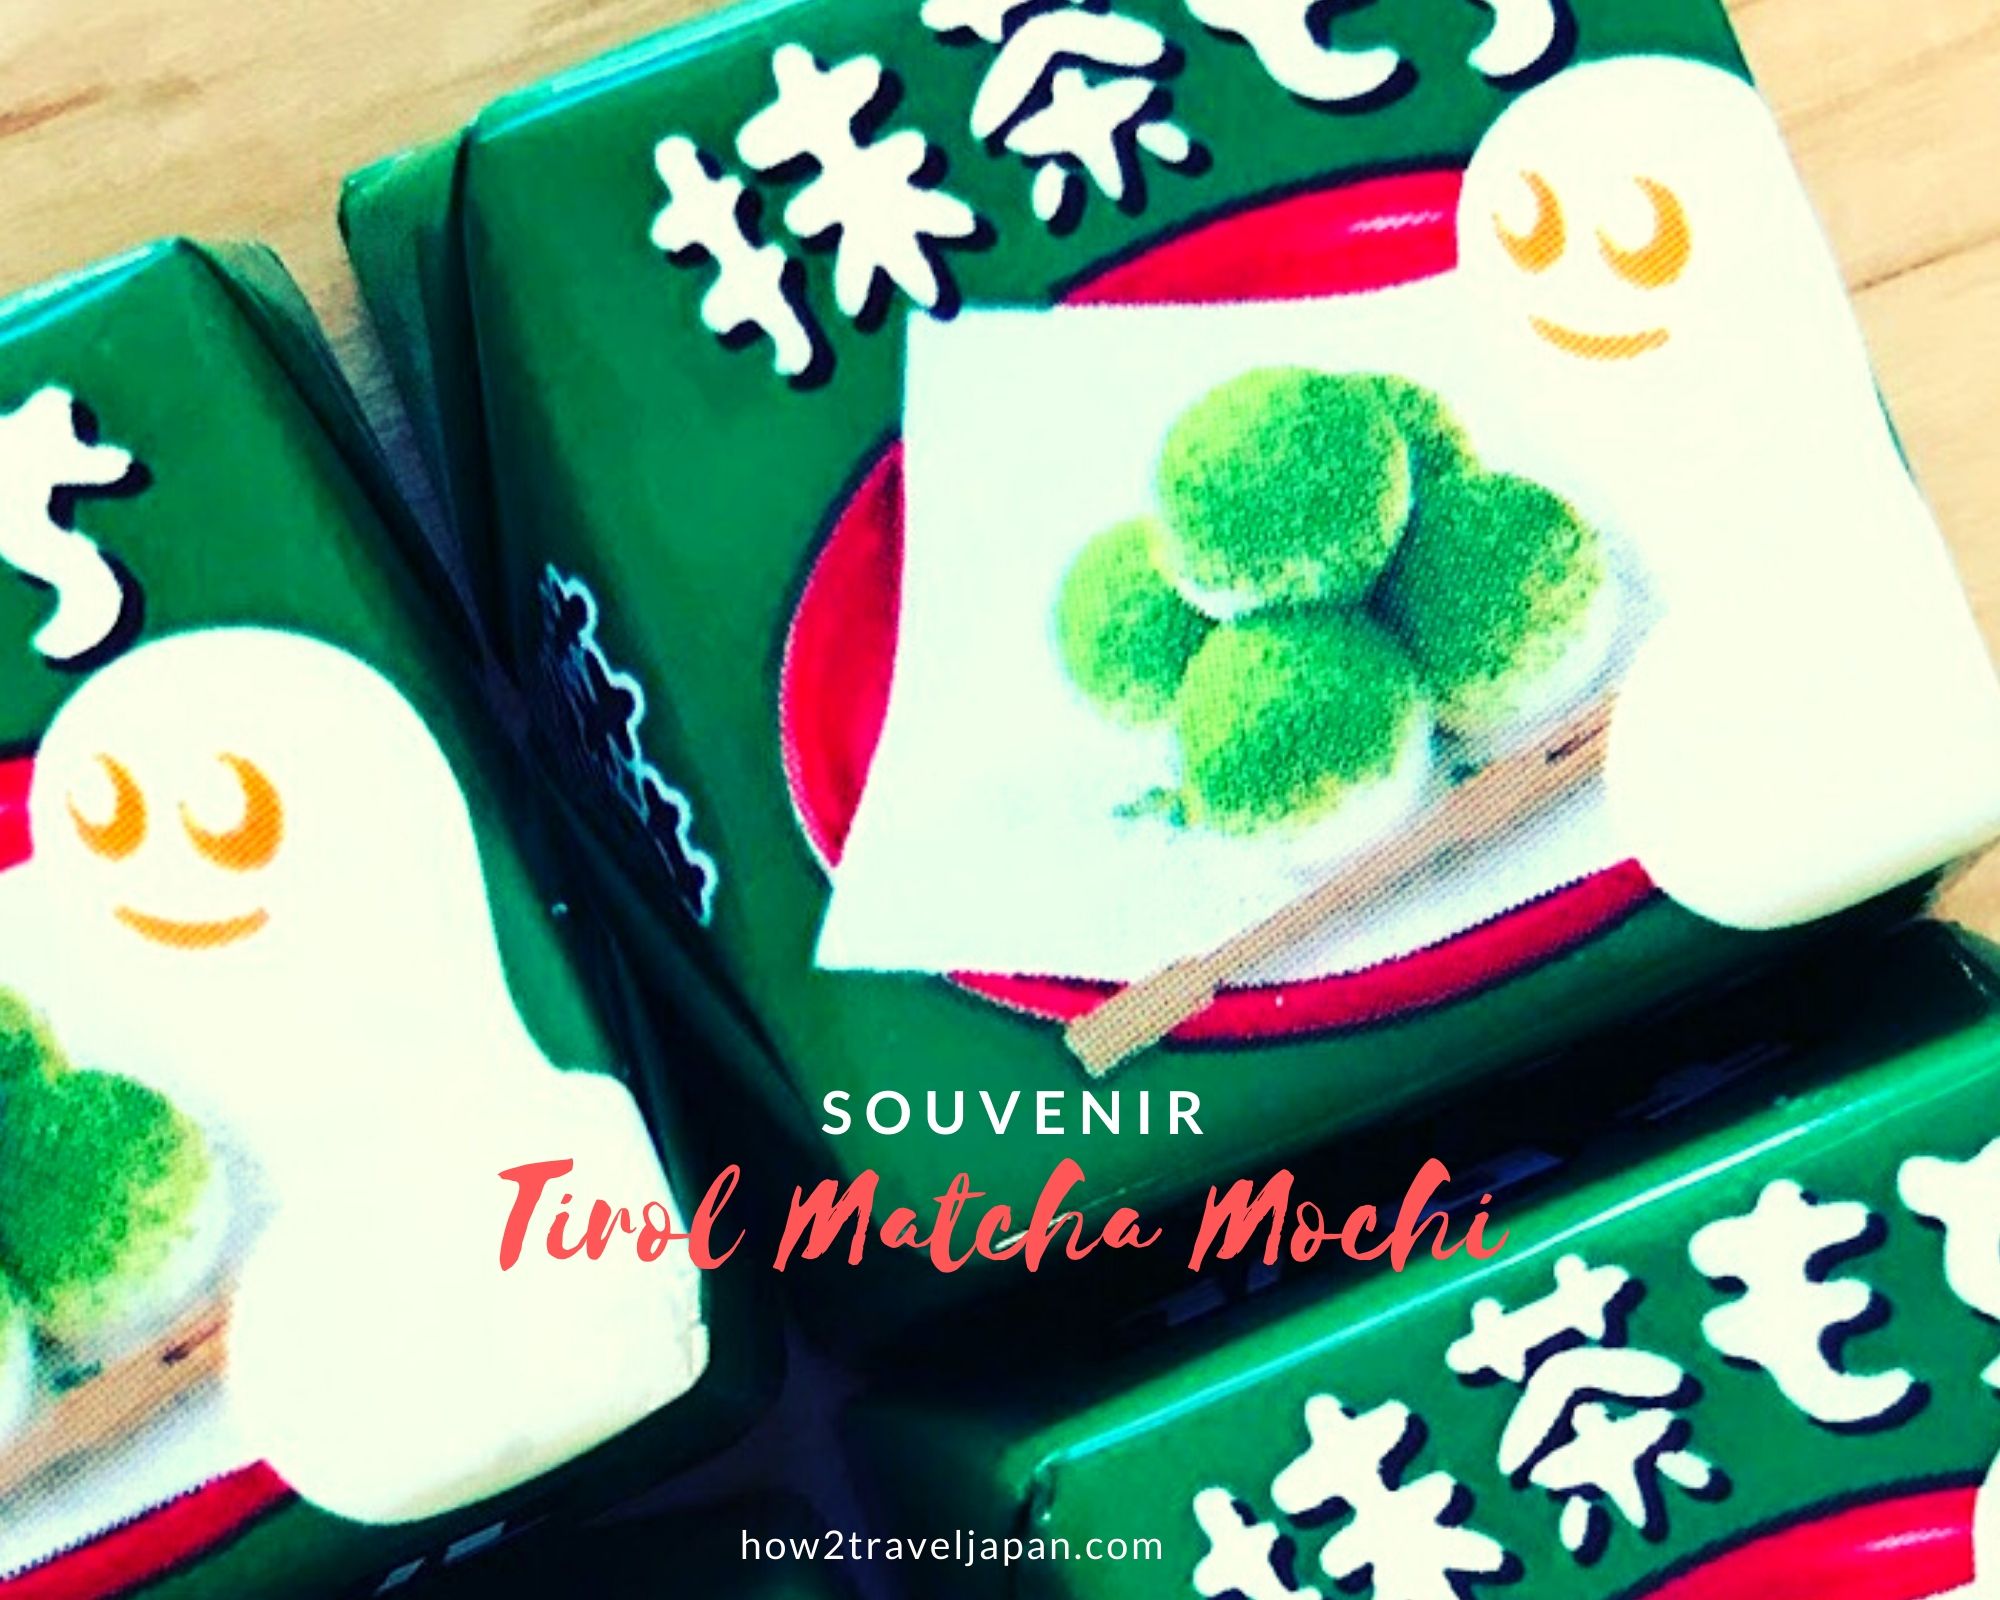 You are currently viewing Tirol-matcha-mochi, ideal souvenir from Japan